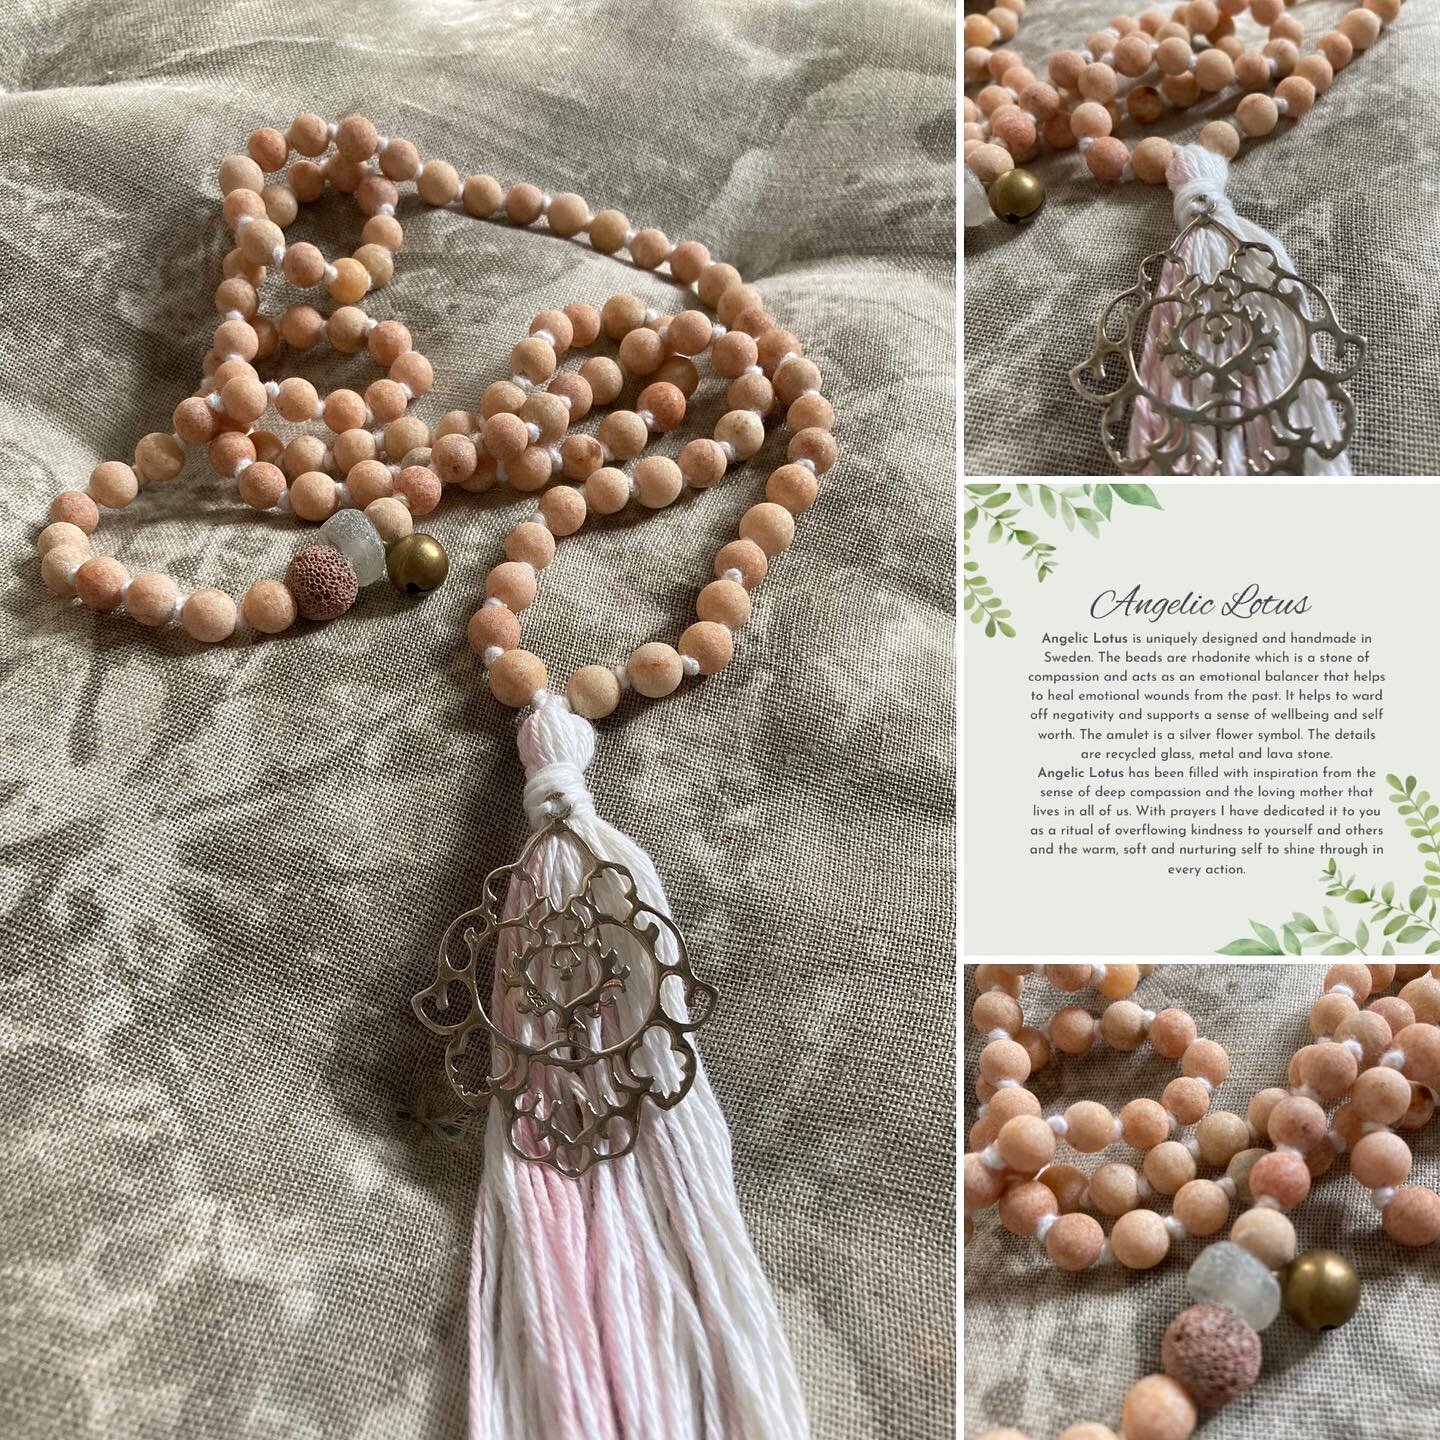 For 17 years now the making of Malas has been a part of our daily life. The business was born when I was pregnant with my daughter Ayisha Temple, together with her Godmother and my sweet friend @miramoonya we started wildly experimenting with rituals